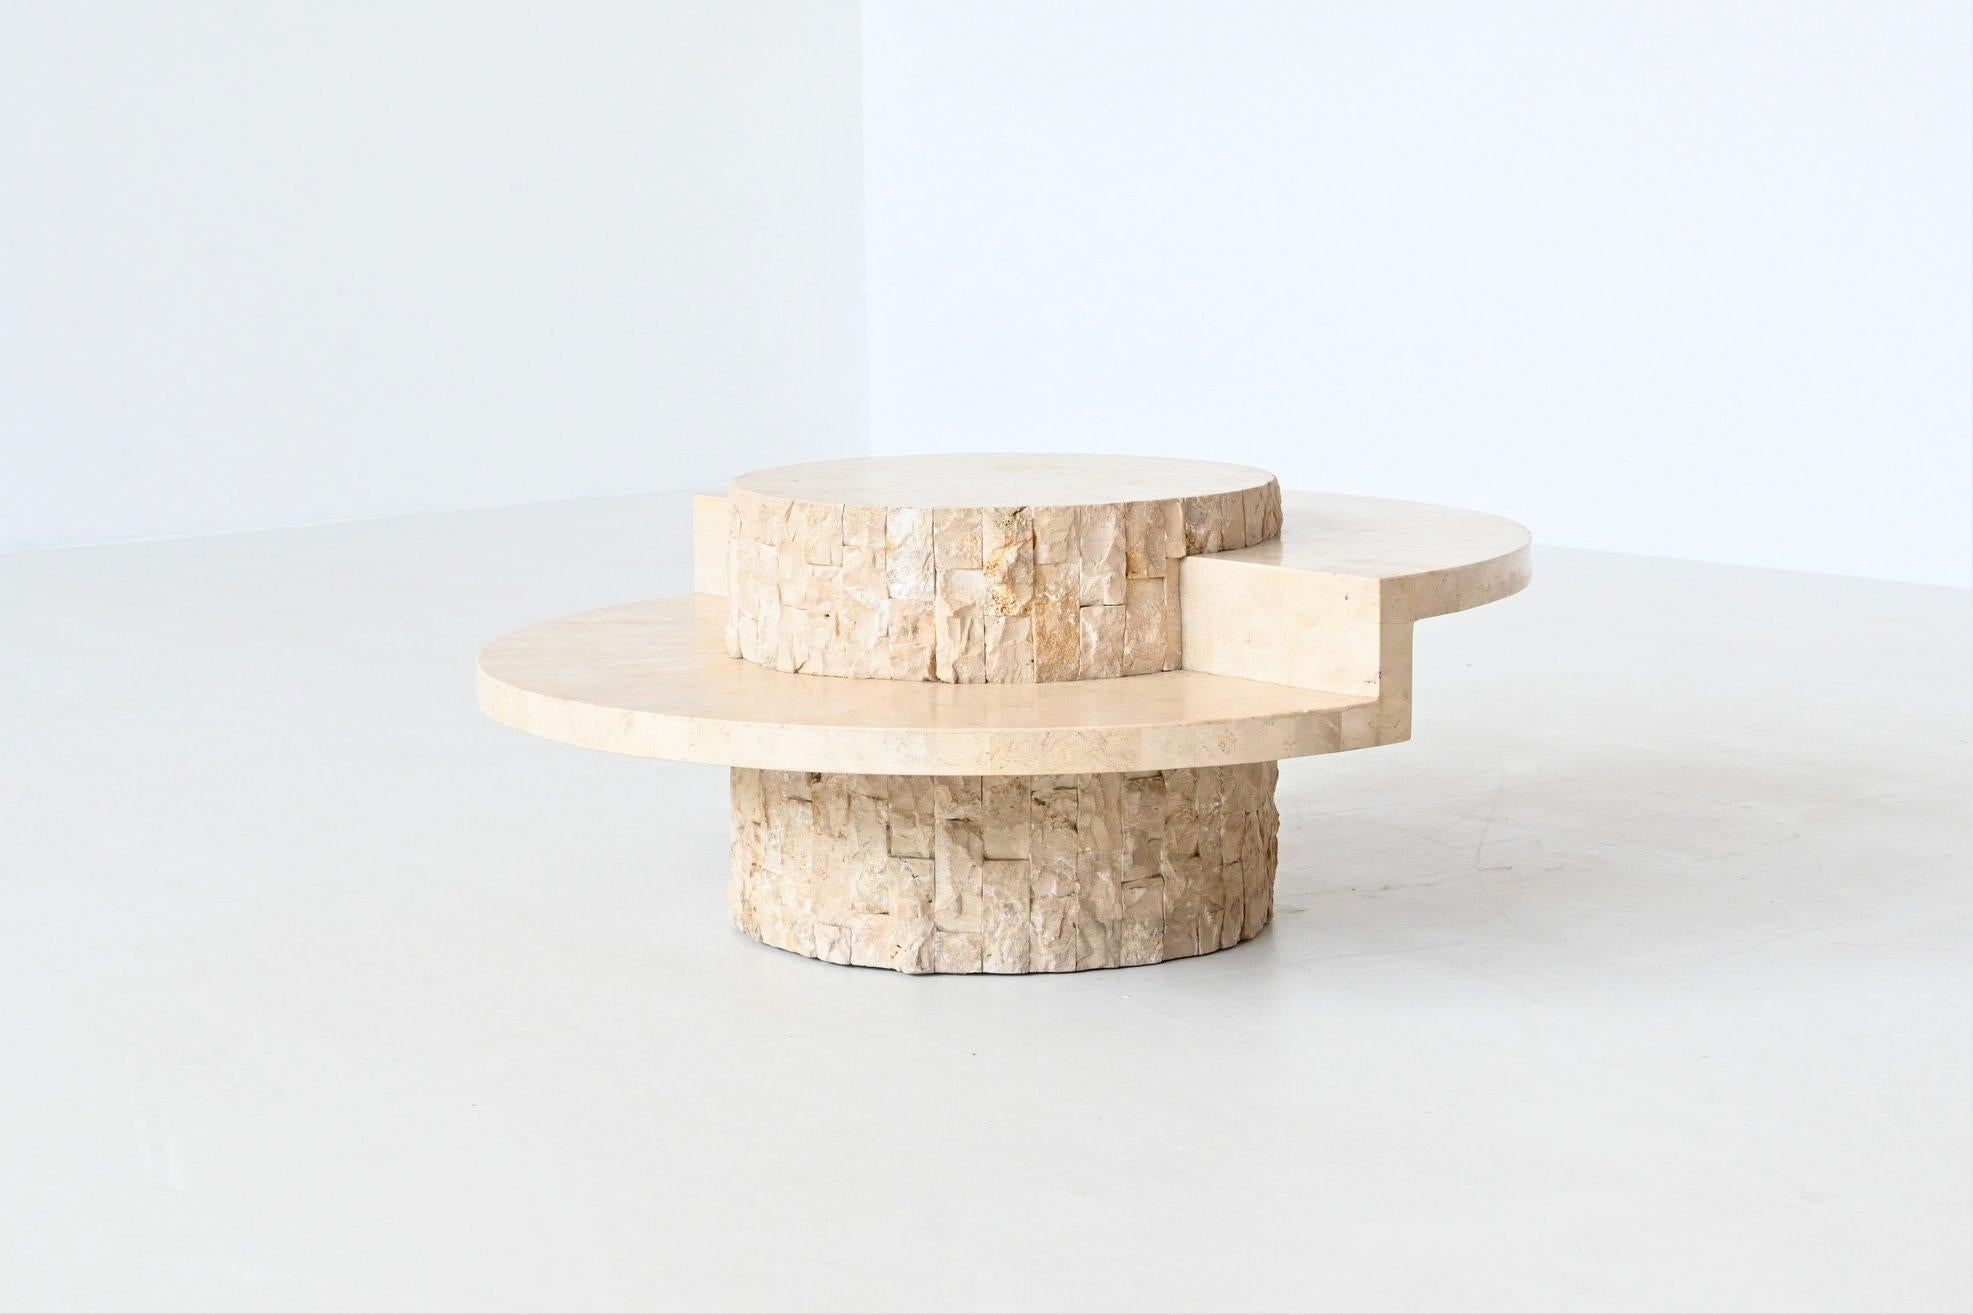 Beautiful sculptural round coffee table, Belgium 1970. The top is made of highly polished cream white Mactan stone supported by a signature textured carved stone tile base. This table offers a sculptural centrepiece for your home with its step level